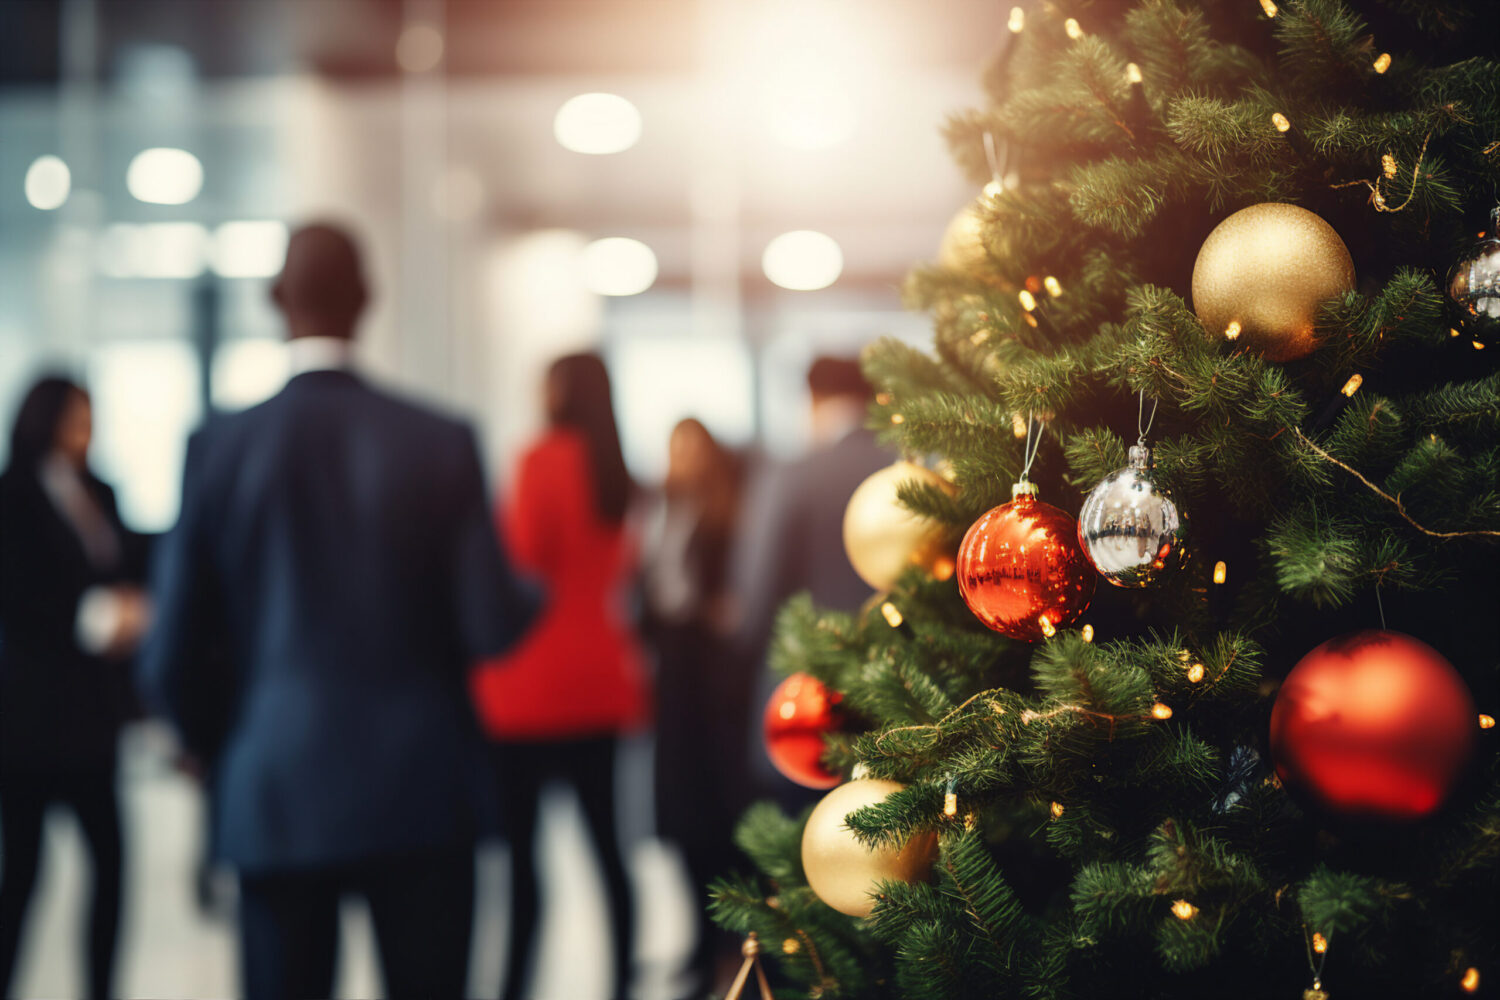 Different forms of employment during the Christmas rush: Part 2 - Workation